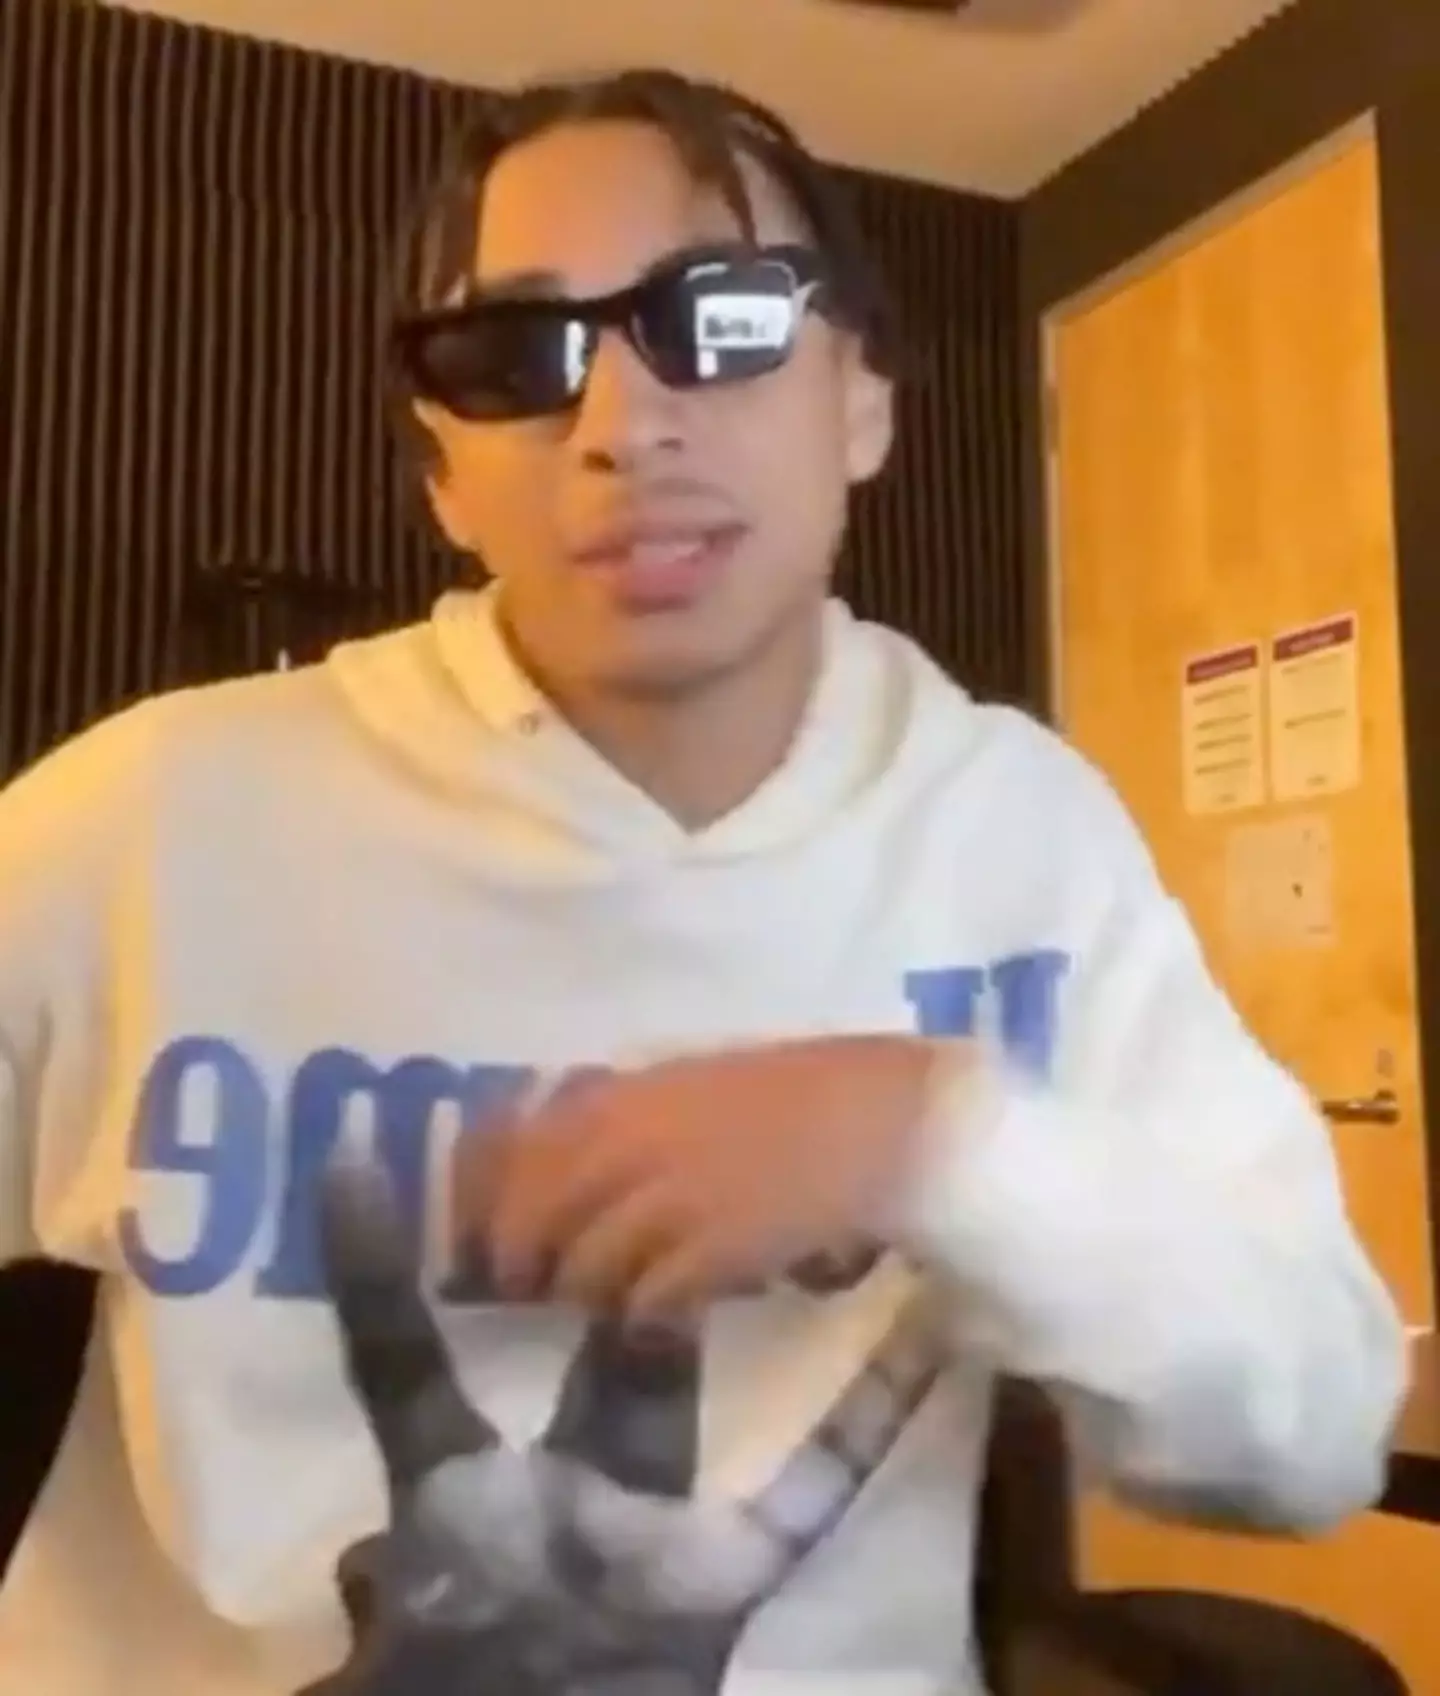 The teenager has come in for some criticism after he shared a video of him rapping.